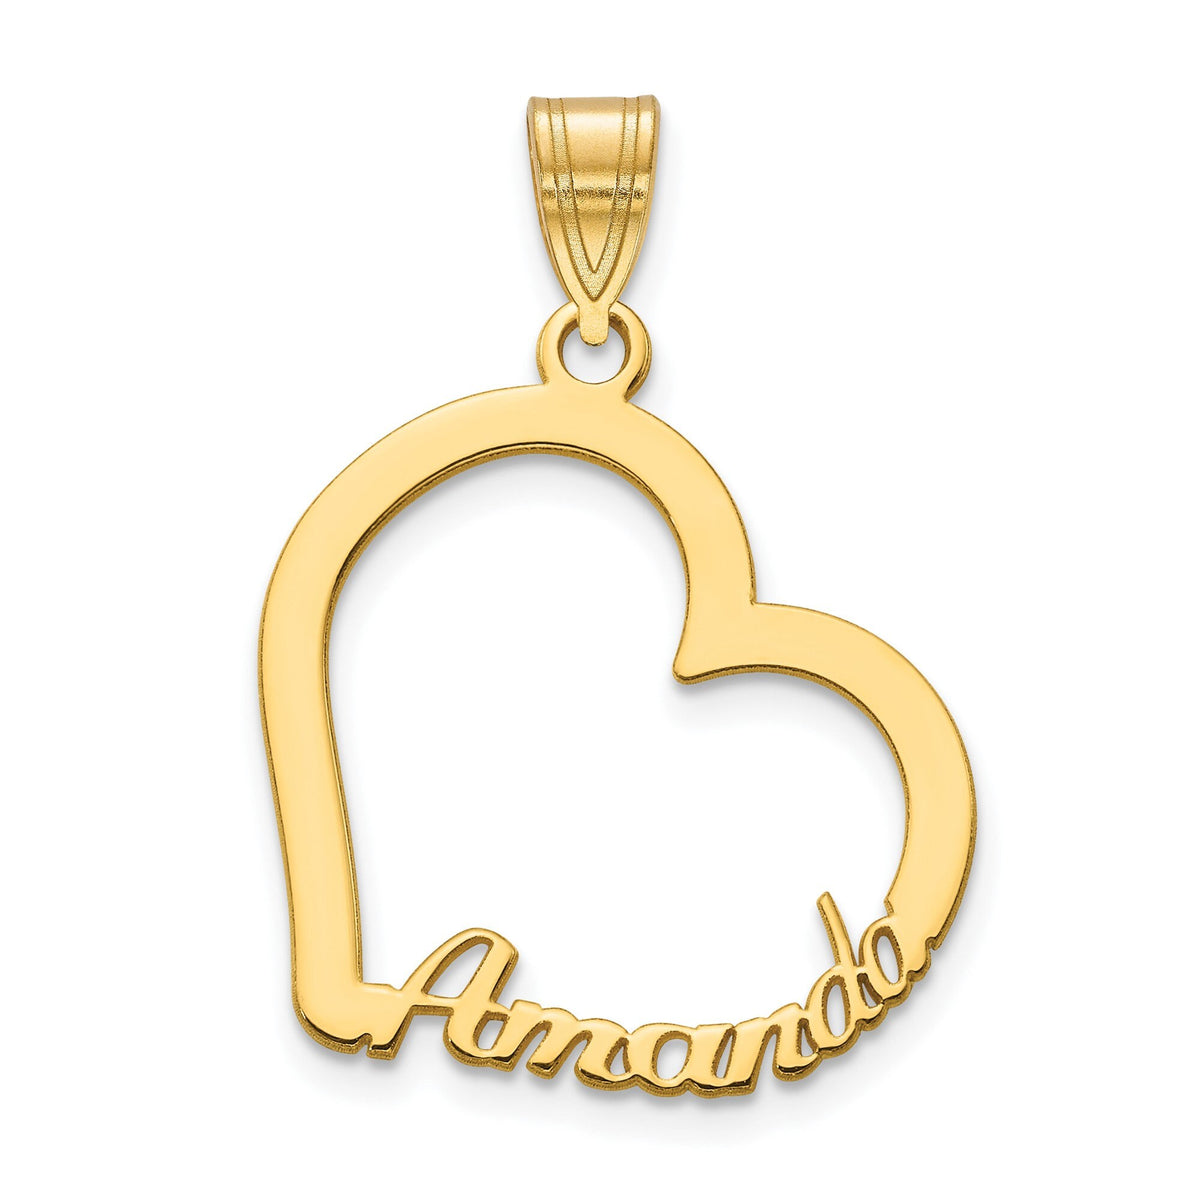 Personalized Open Heart Name Necklace in Sterling Silver, 10k, or 14k Gold Chain Length 16, 18, & 20 Inches (1 inches Tall) Heart Pendant